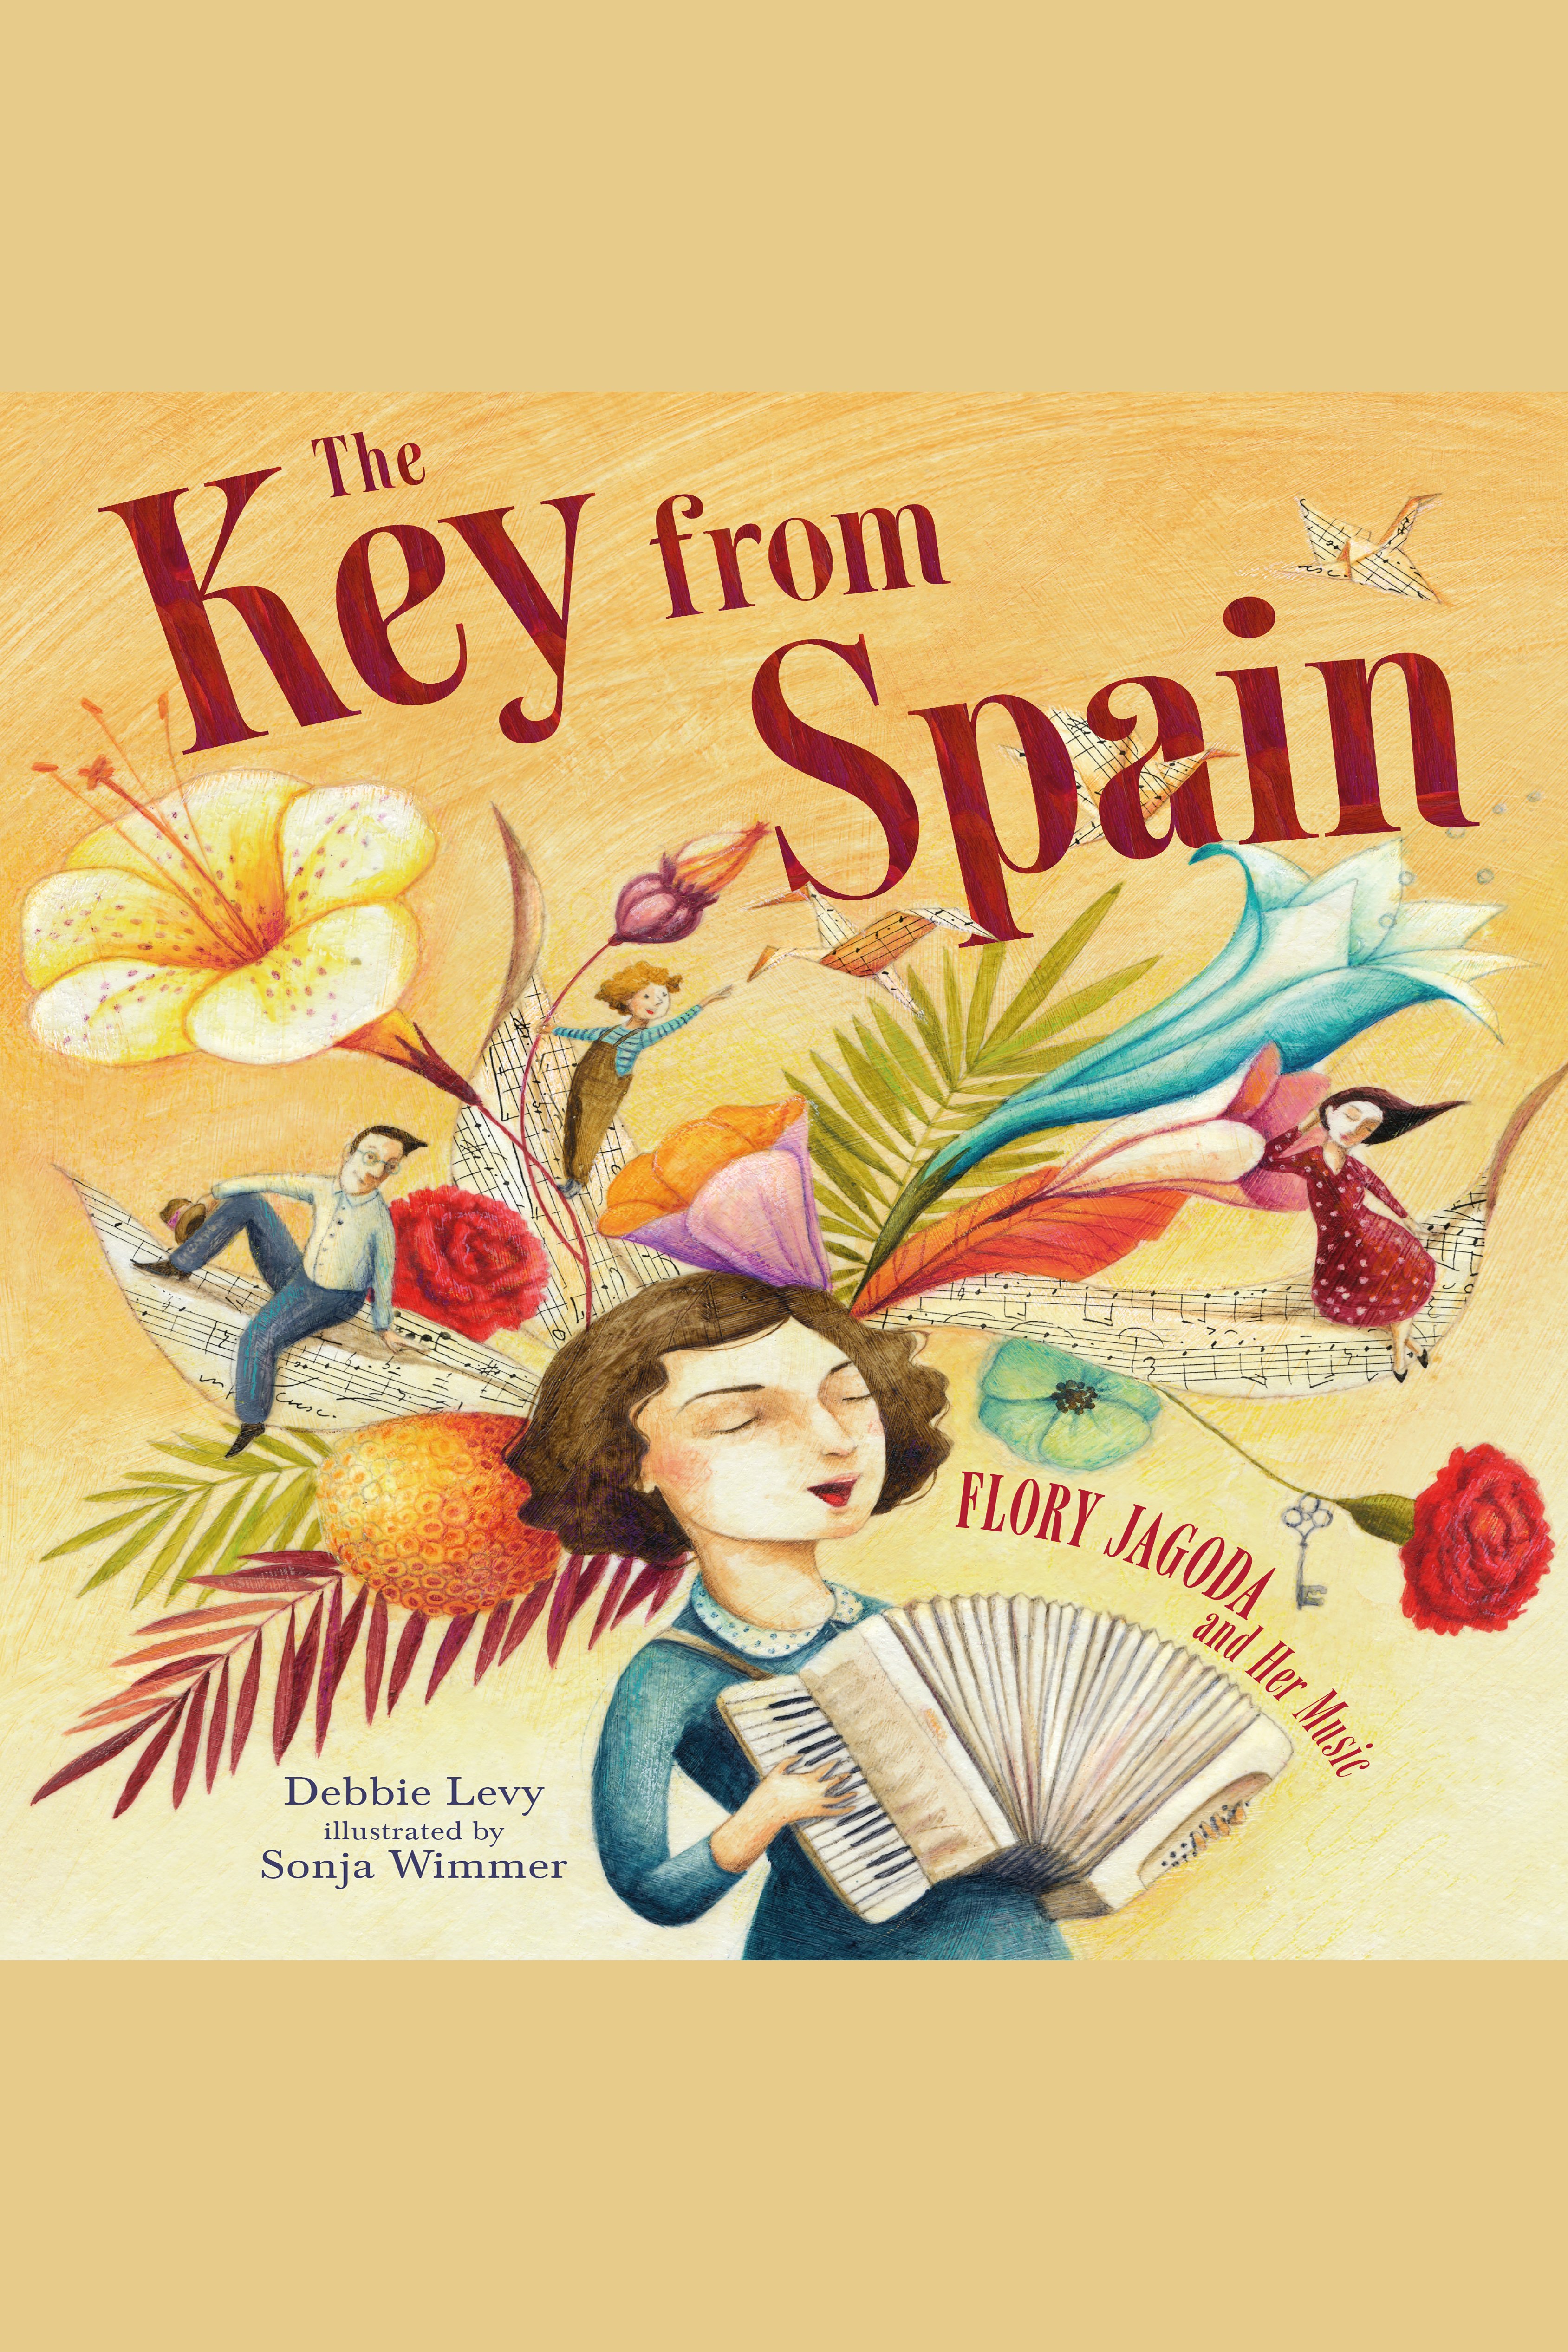 The Key from Spain Flory Jagoda and her music cover image